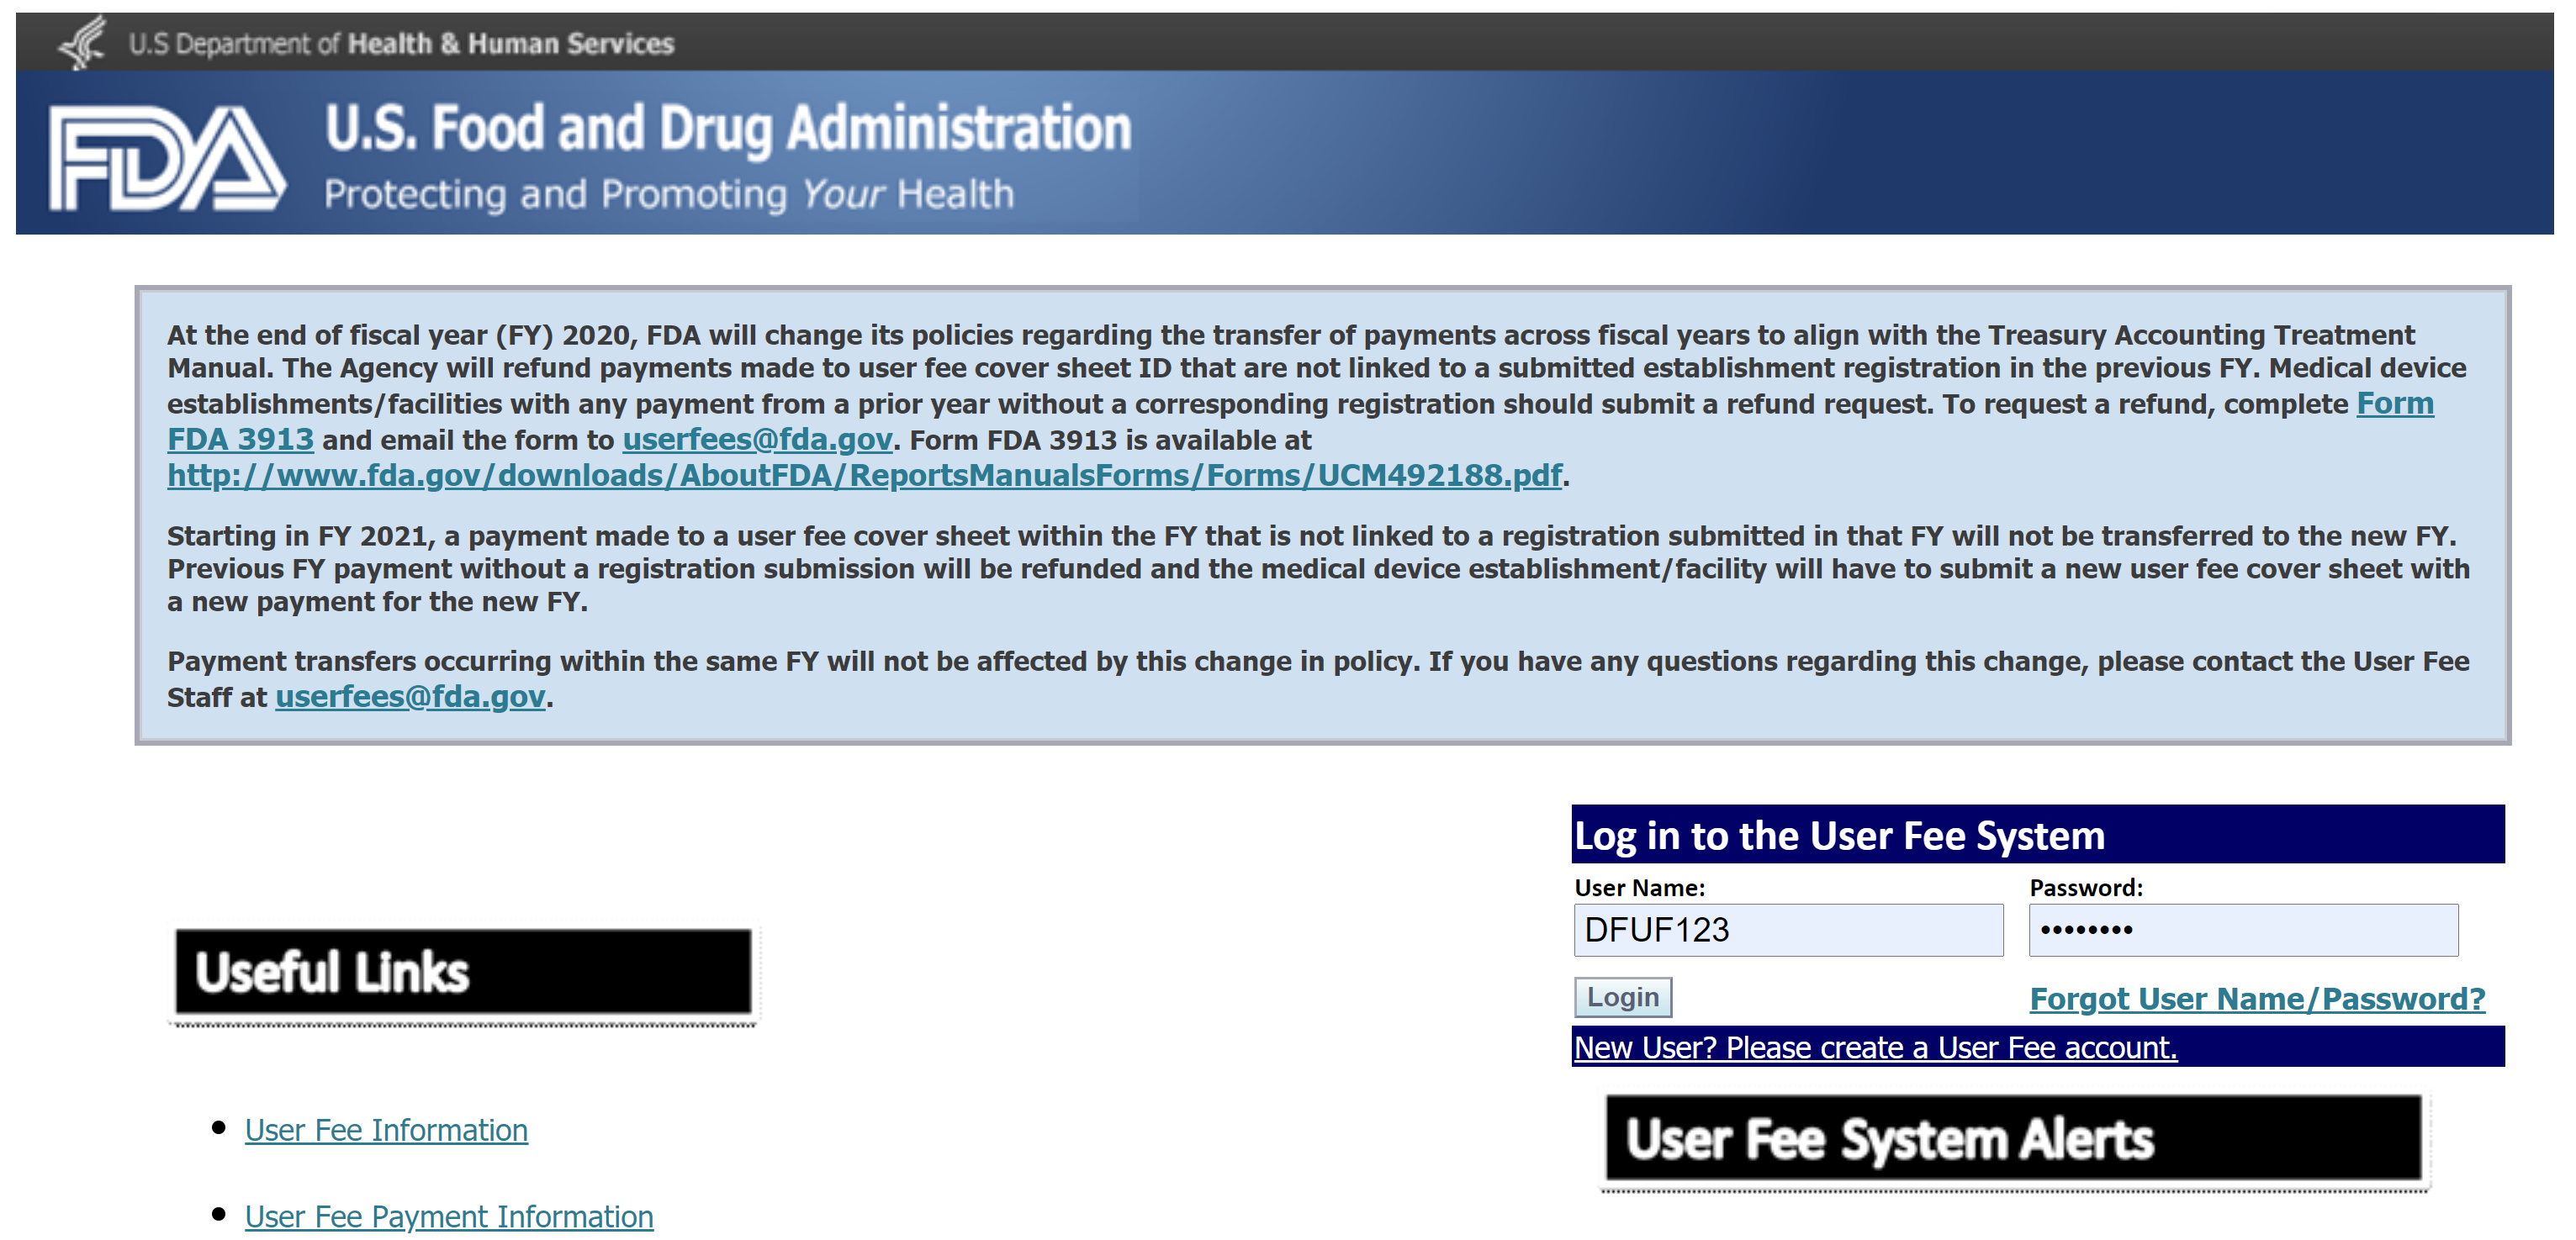 DFUF Website FDA Registration and Listing for Medical Devices